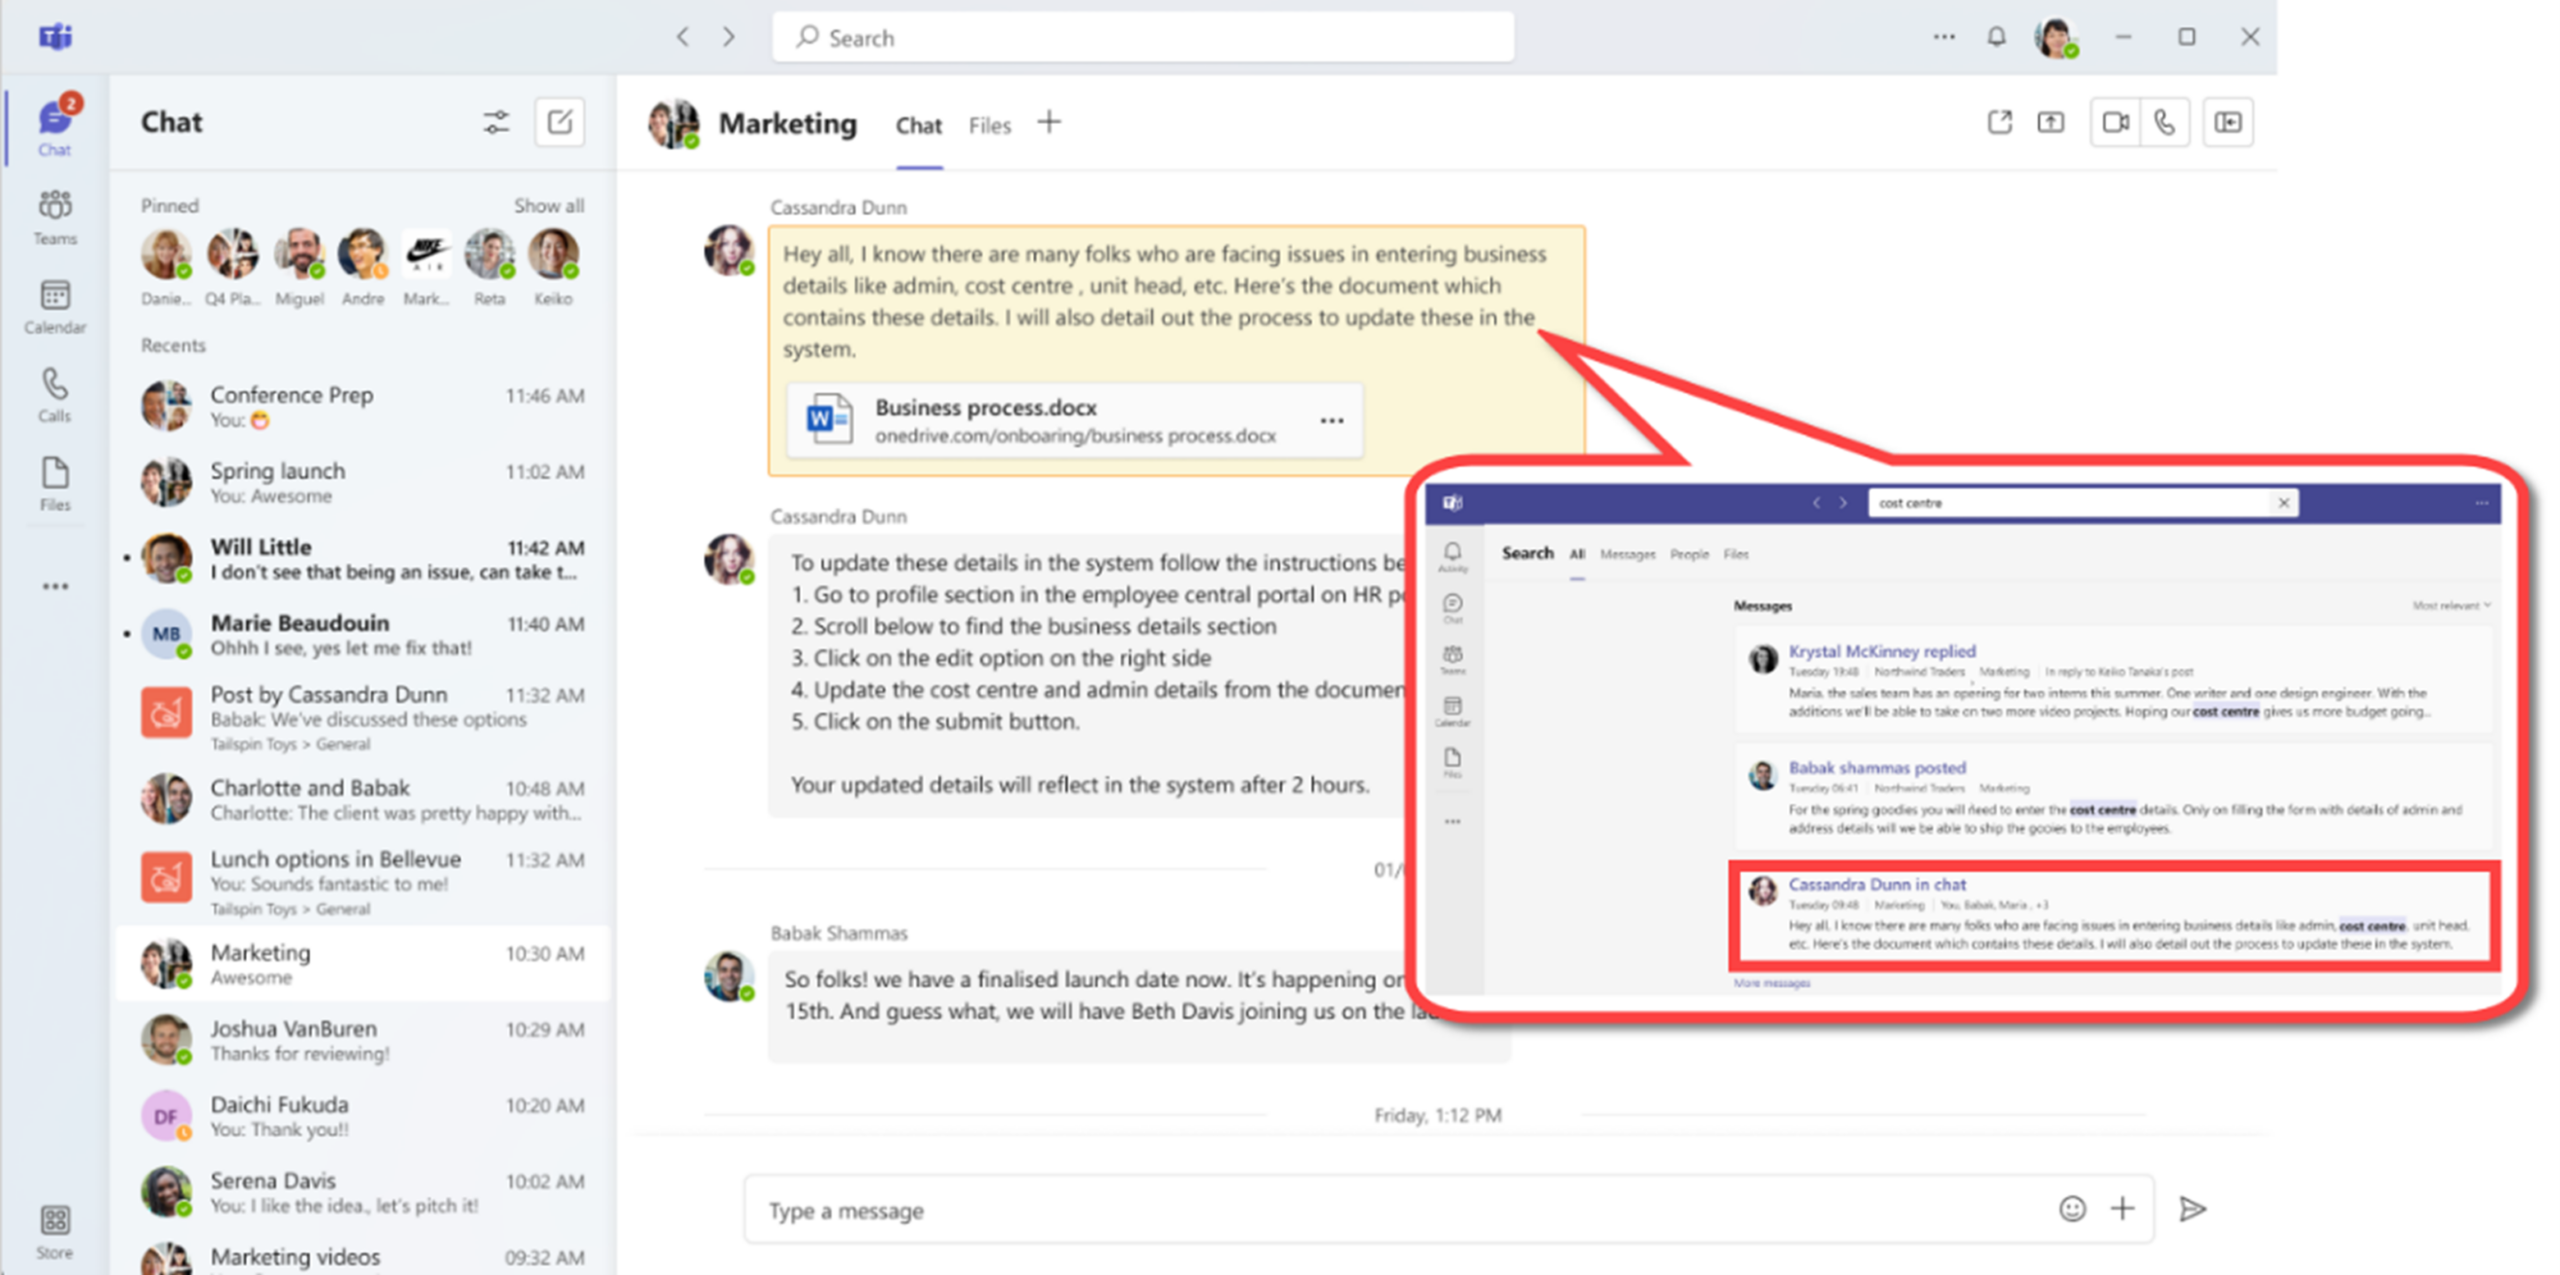 Microsoft Teams: Viewing the Full Chat conversation thread after clicking on search message results